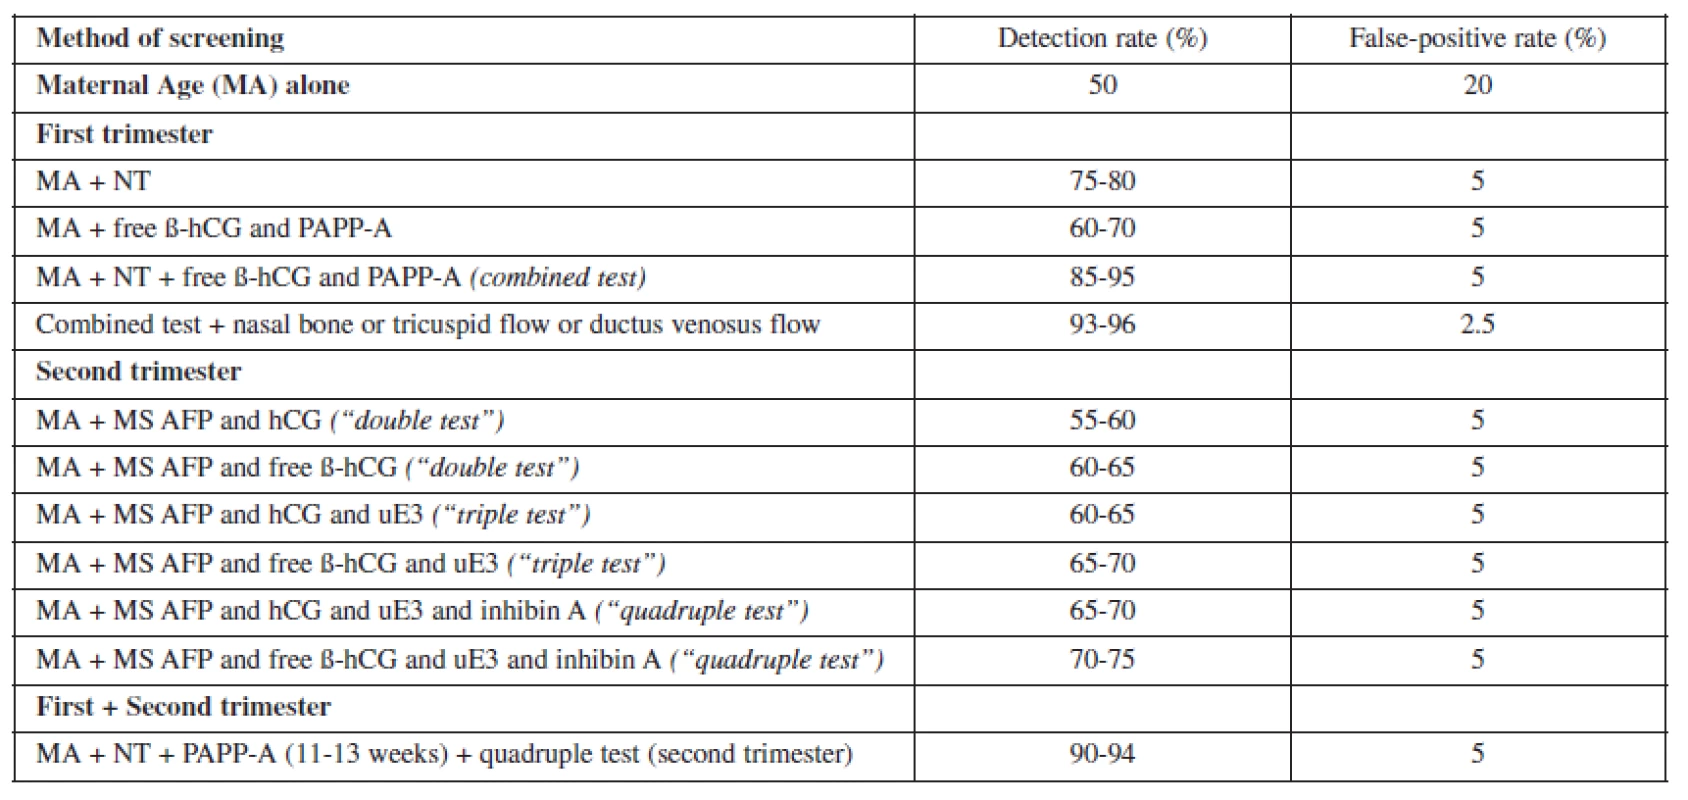 Various methods of screening for fetal aneuploidy and their corresponding detection and false positive rates.